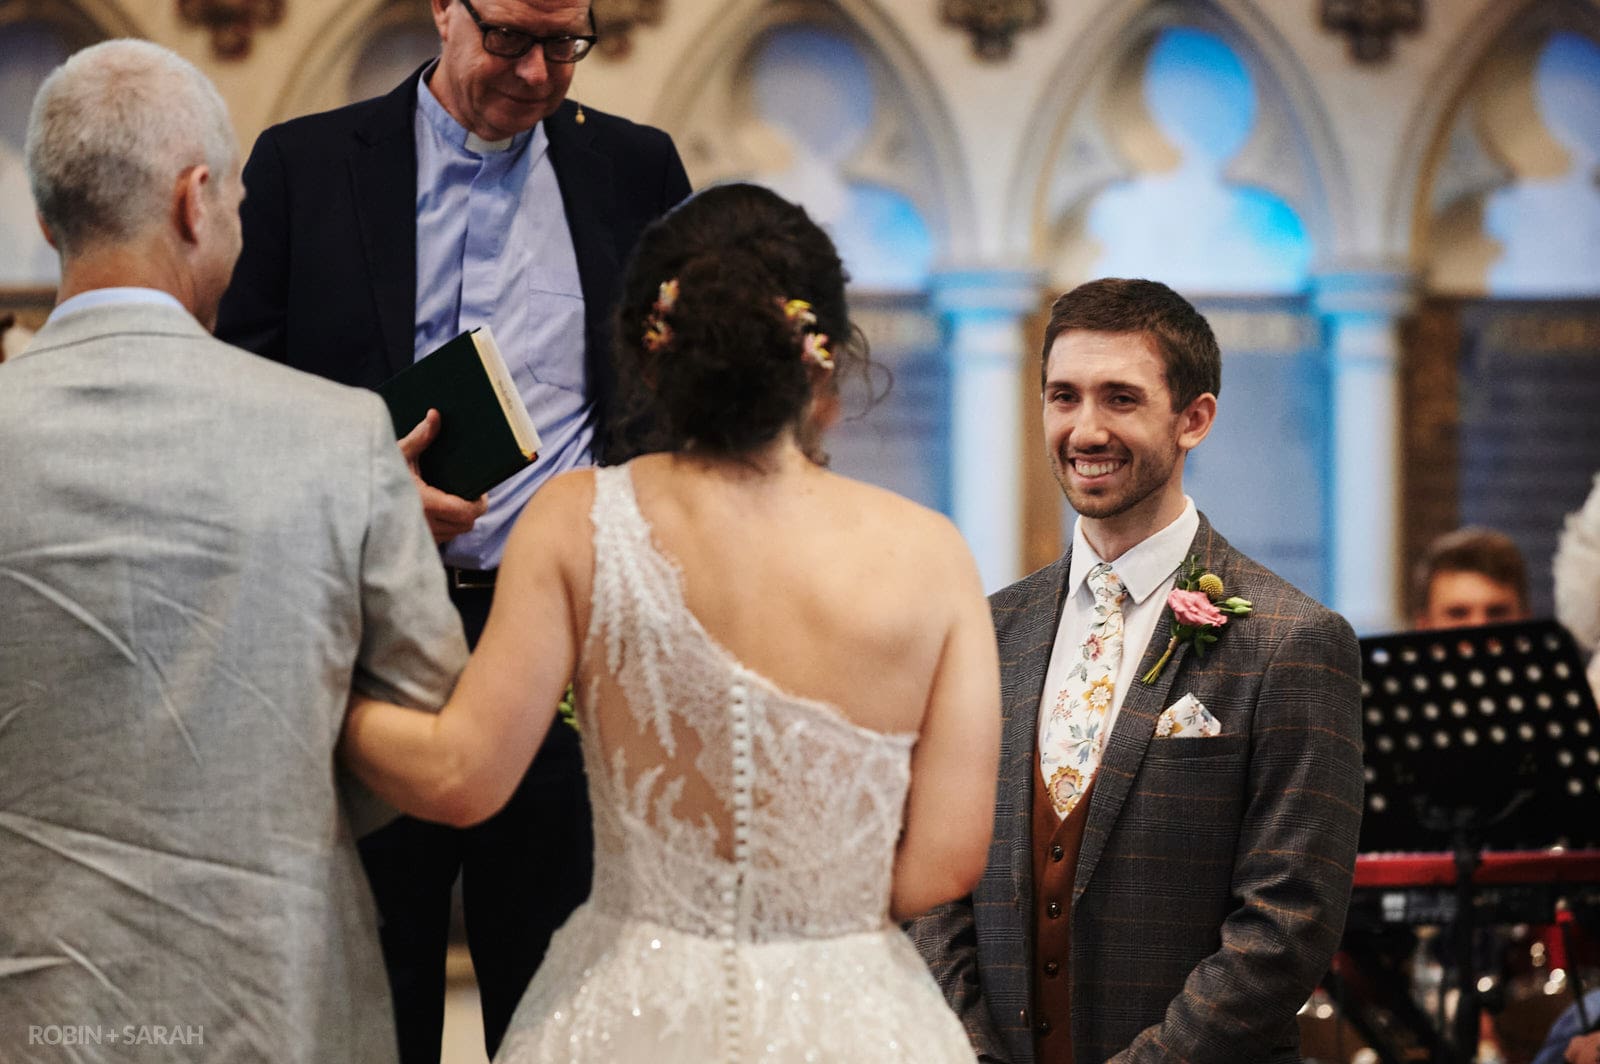 Groom smiles at bride as she walks up aisle